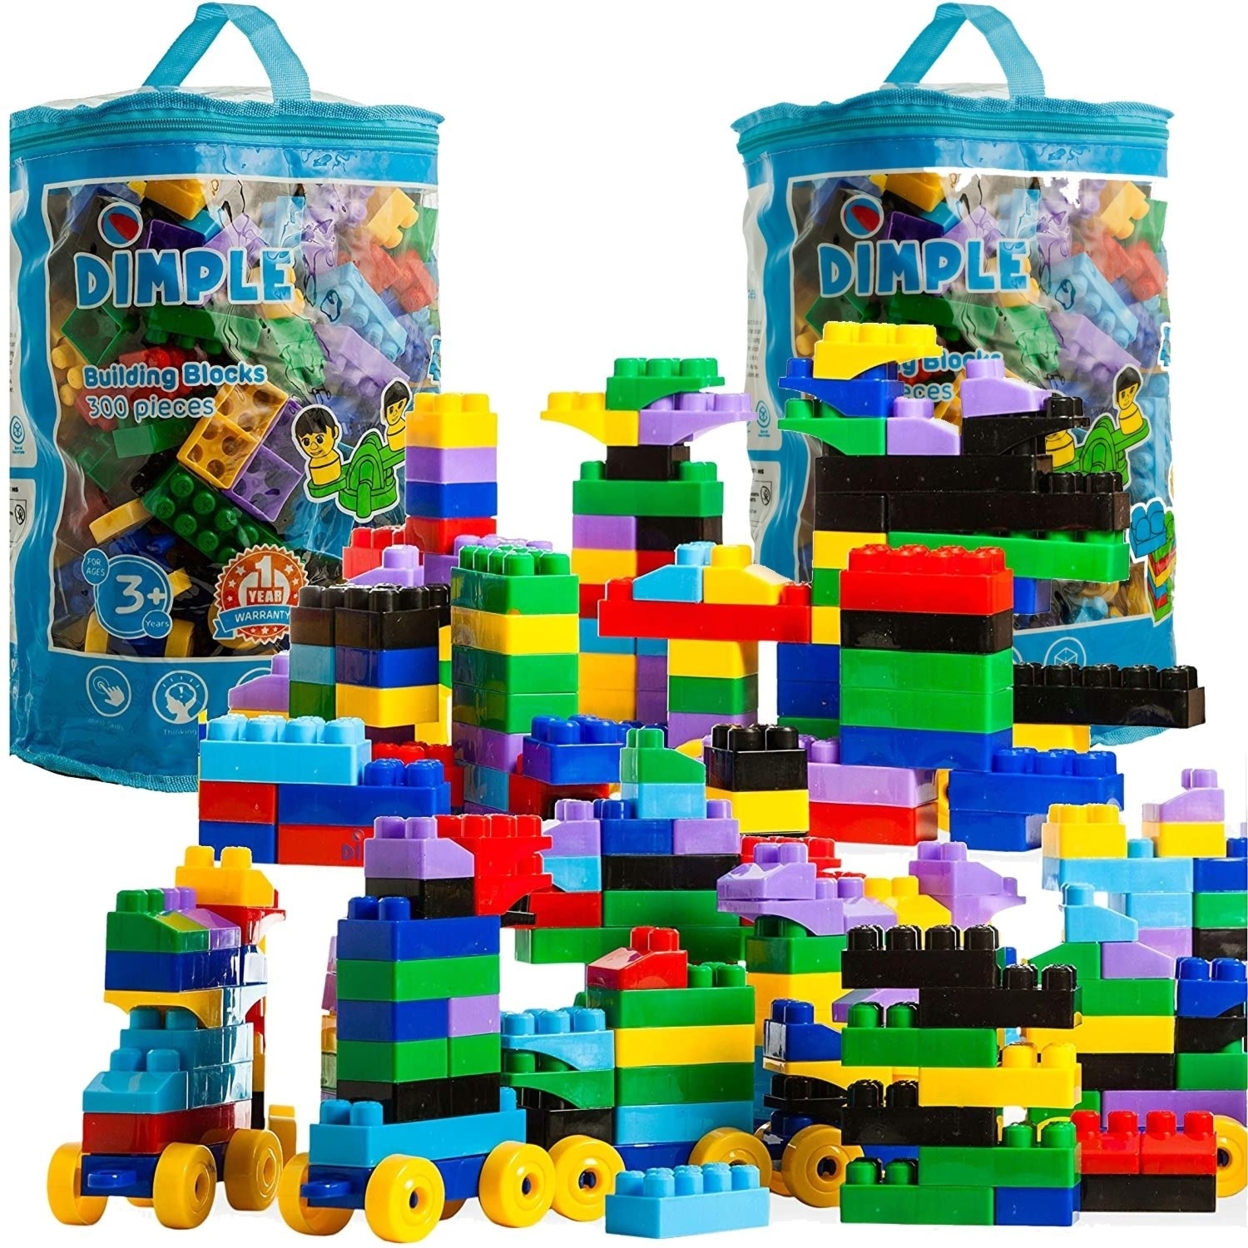 (2 Set) Dimple 300 Pieces Soft Kid-Friendly Plastic Multicolored Building Block Set With Wheeled Train Pieces, Gift For Kids & Toddlers